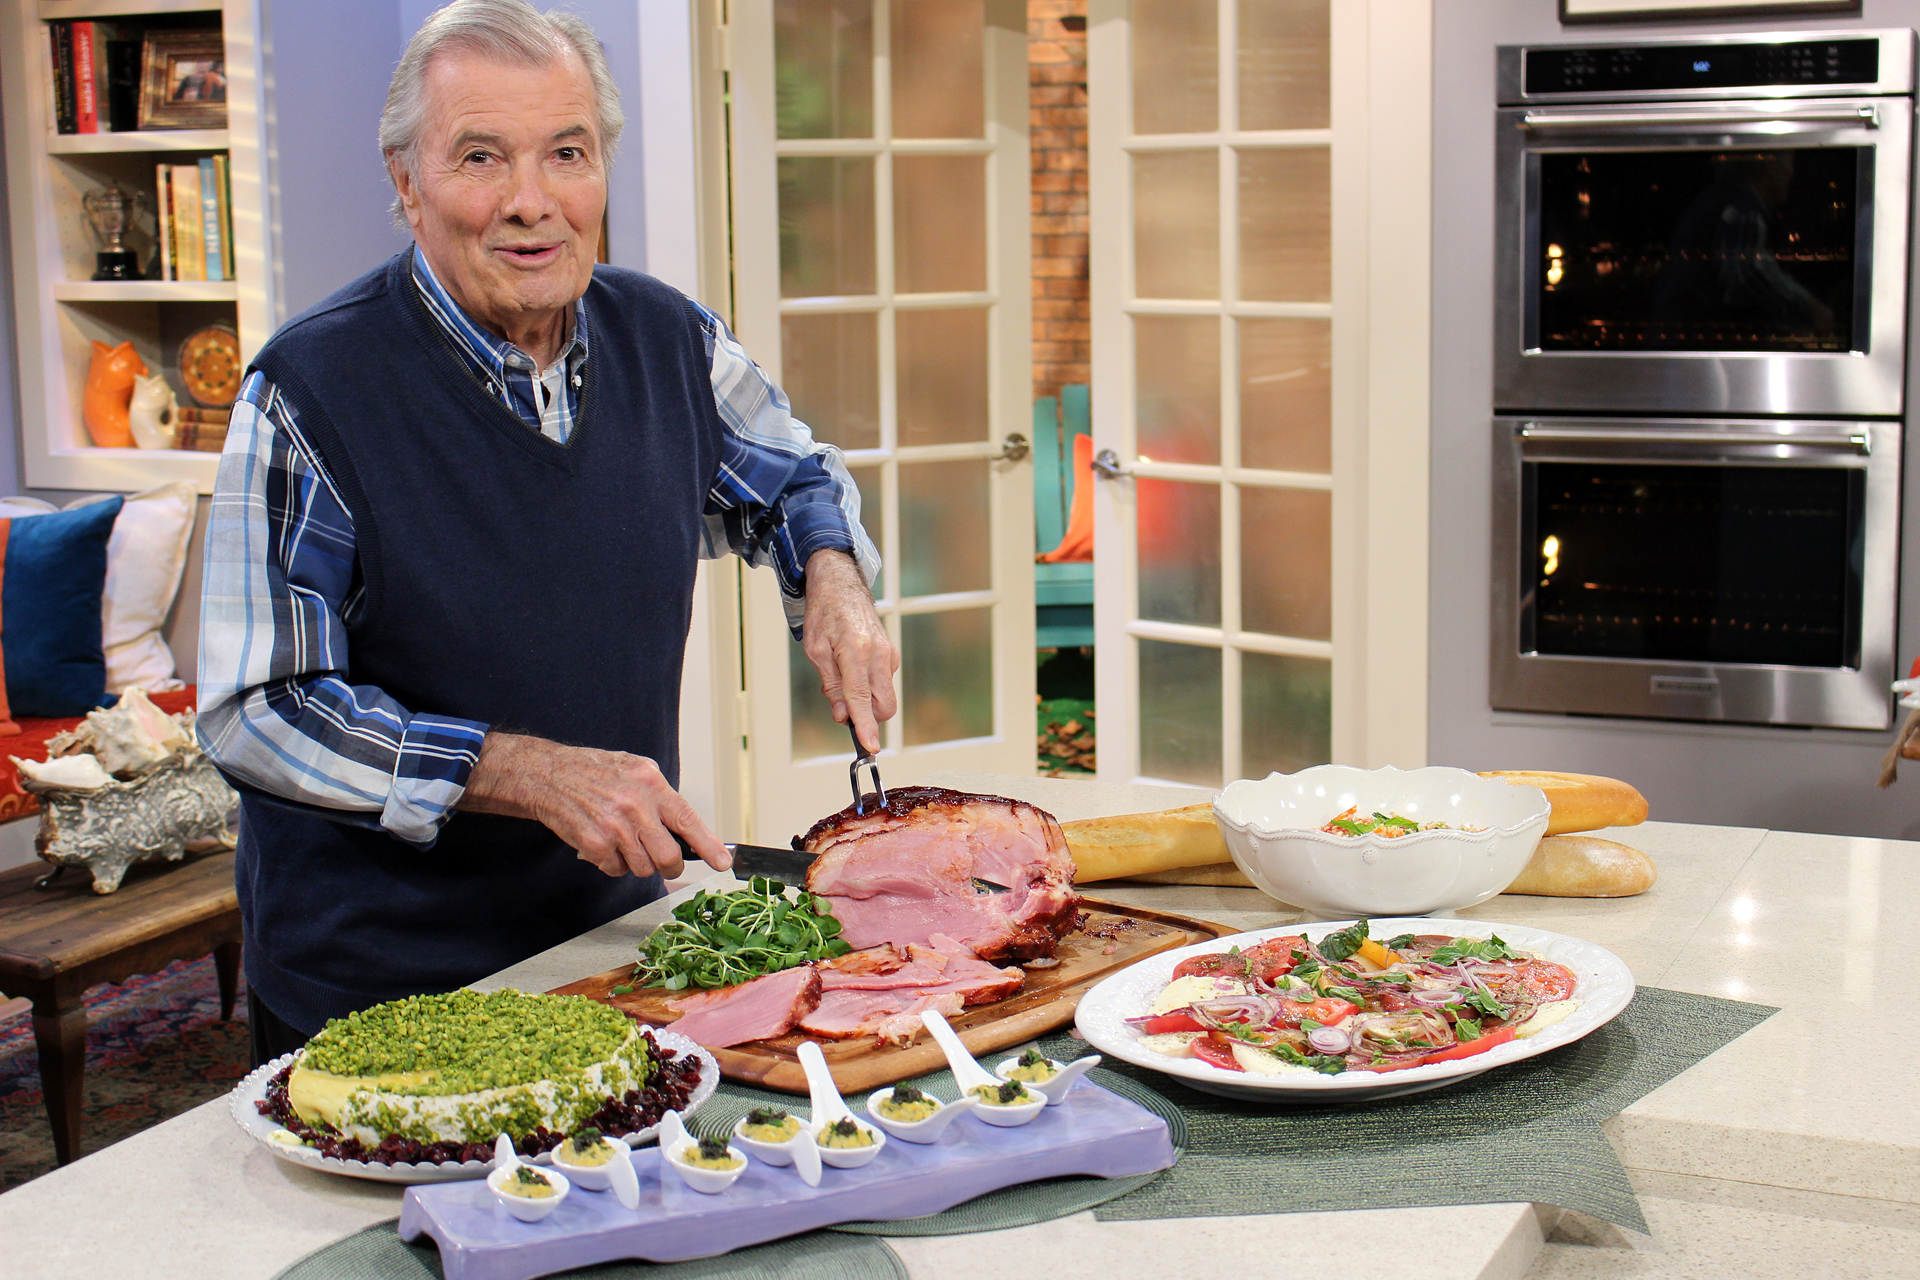 Jacques slicing the Smoked Ham Glazed with Maple Syrup on the set of Heart & Soul.